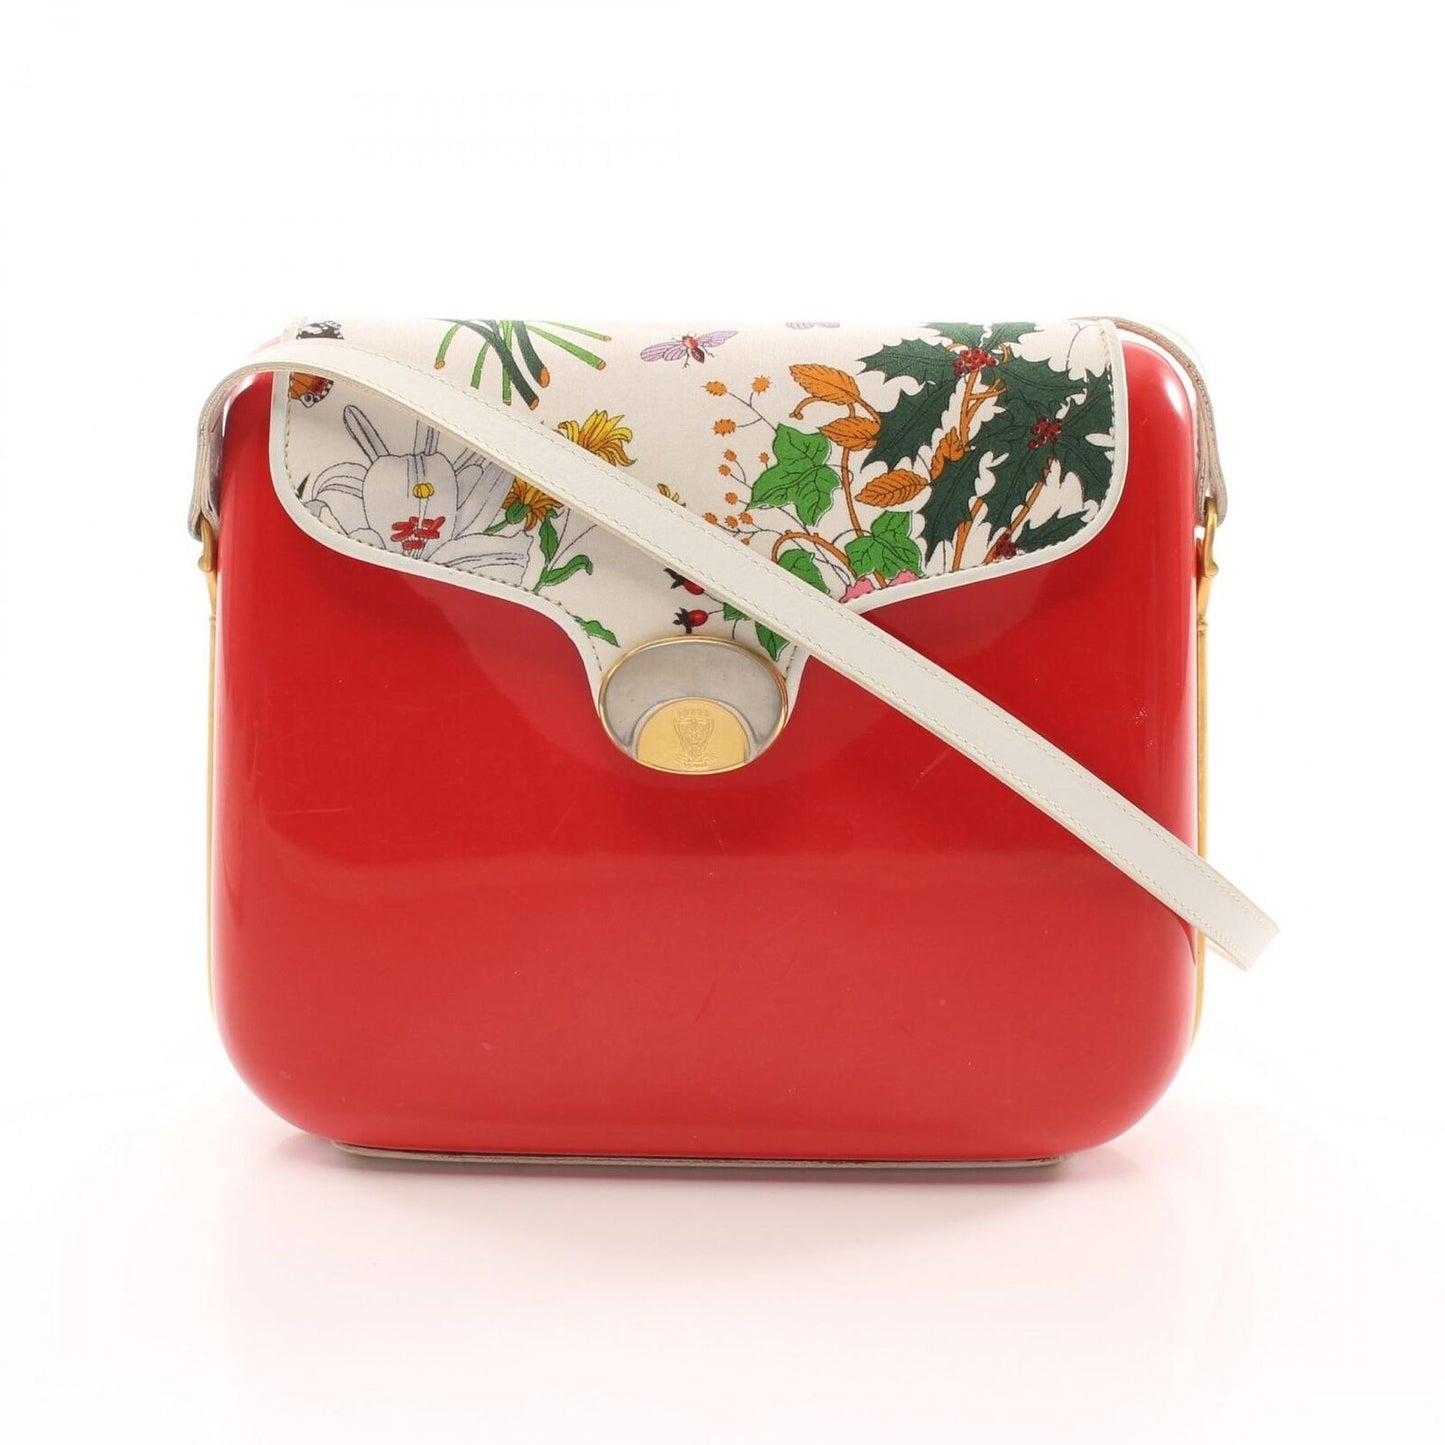 One of a kind, Gucci red Lucite cross body/shoulder bag with a leather floral flap top and gold horse-bit accents!